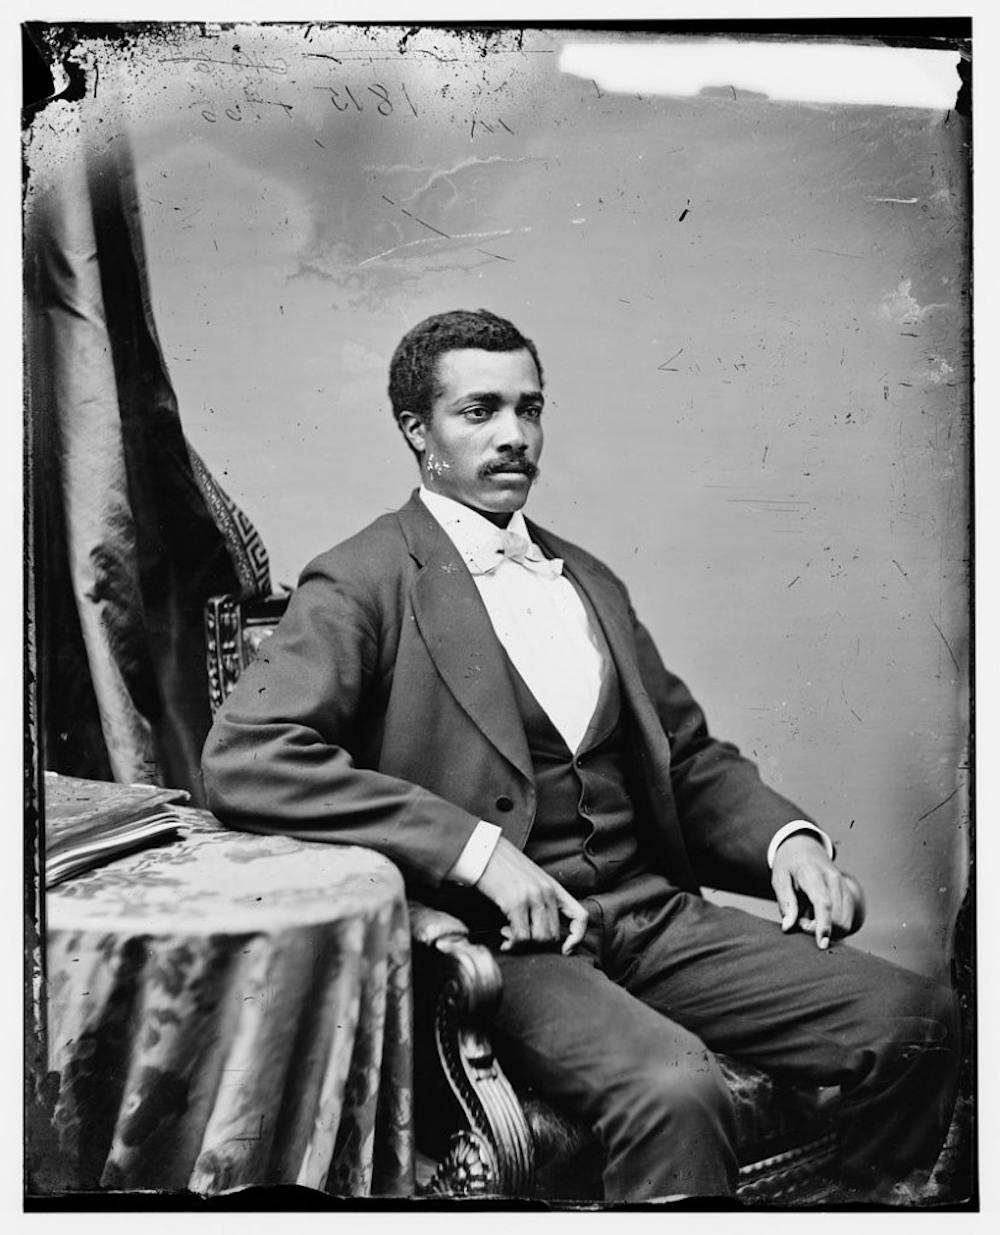 <p dir="ltr"><span>Josiah T. Walls, 1842-1905, was Florida’s first African American representative. He is the only person in Alachua County’s history to serve as the Gainesville mayor, a county commissioner, a school board member, a state senator and a U.S. congressman.</span></p>